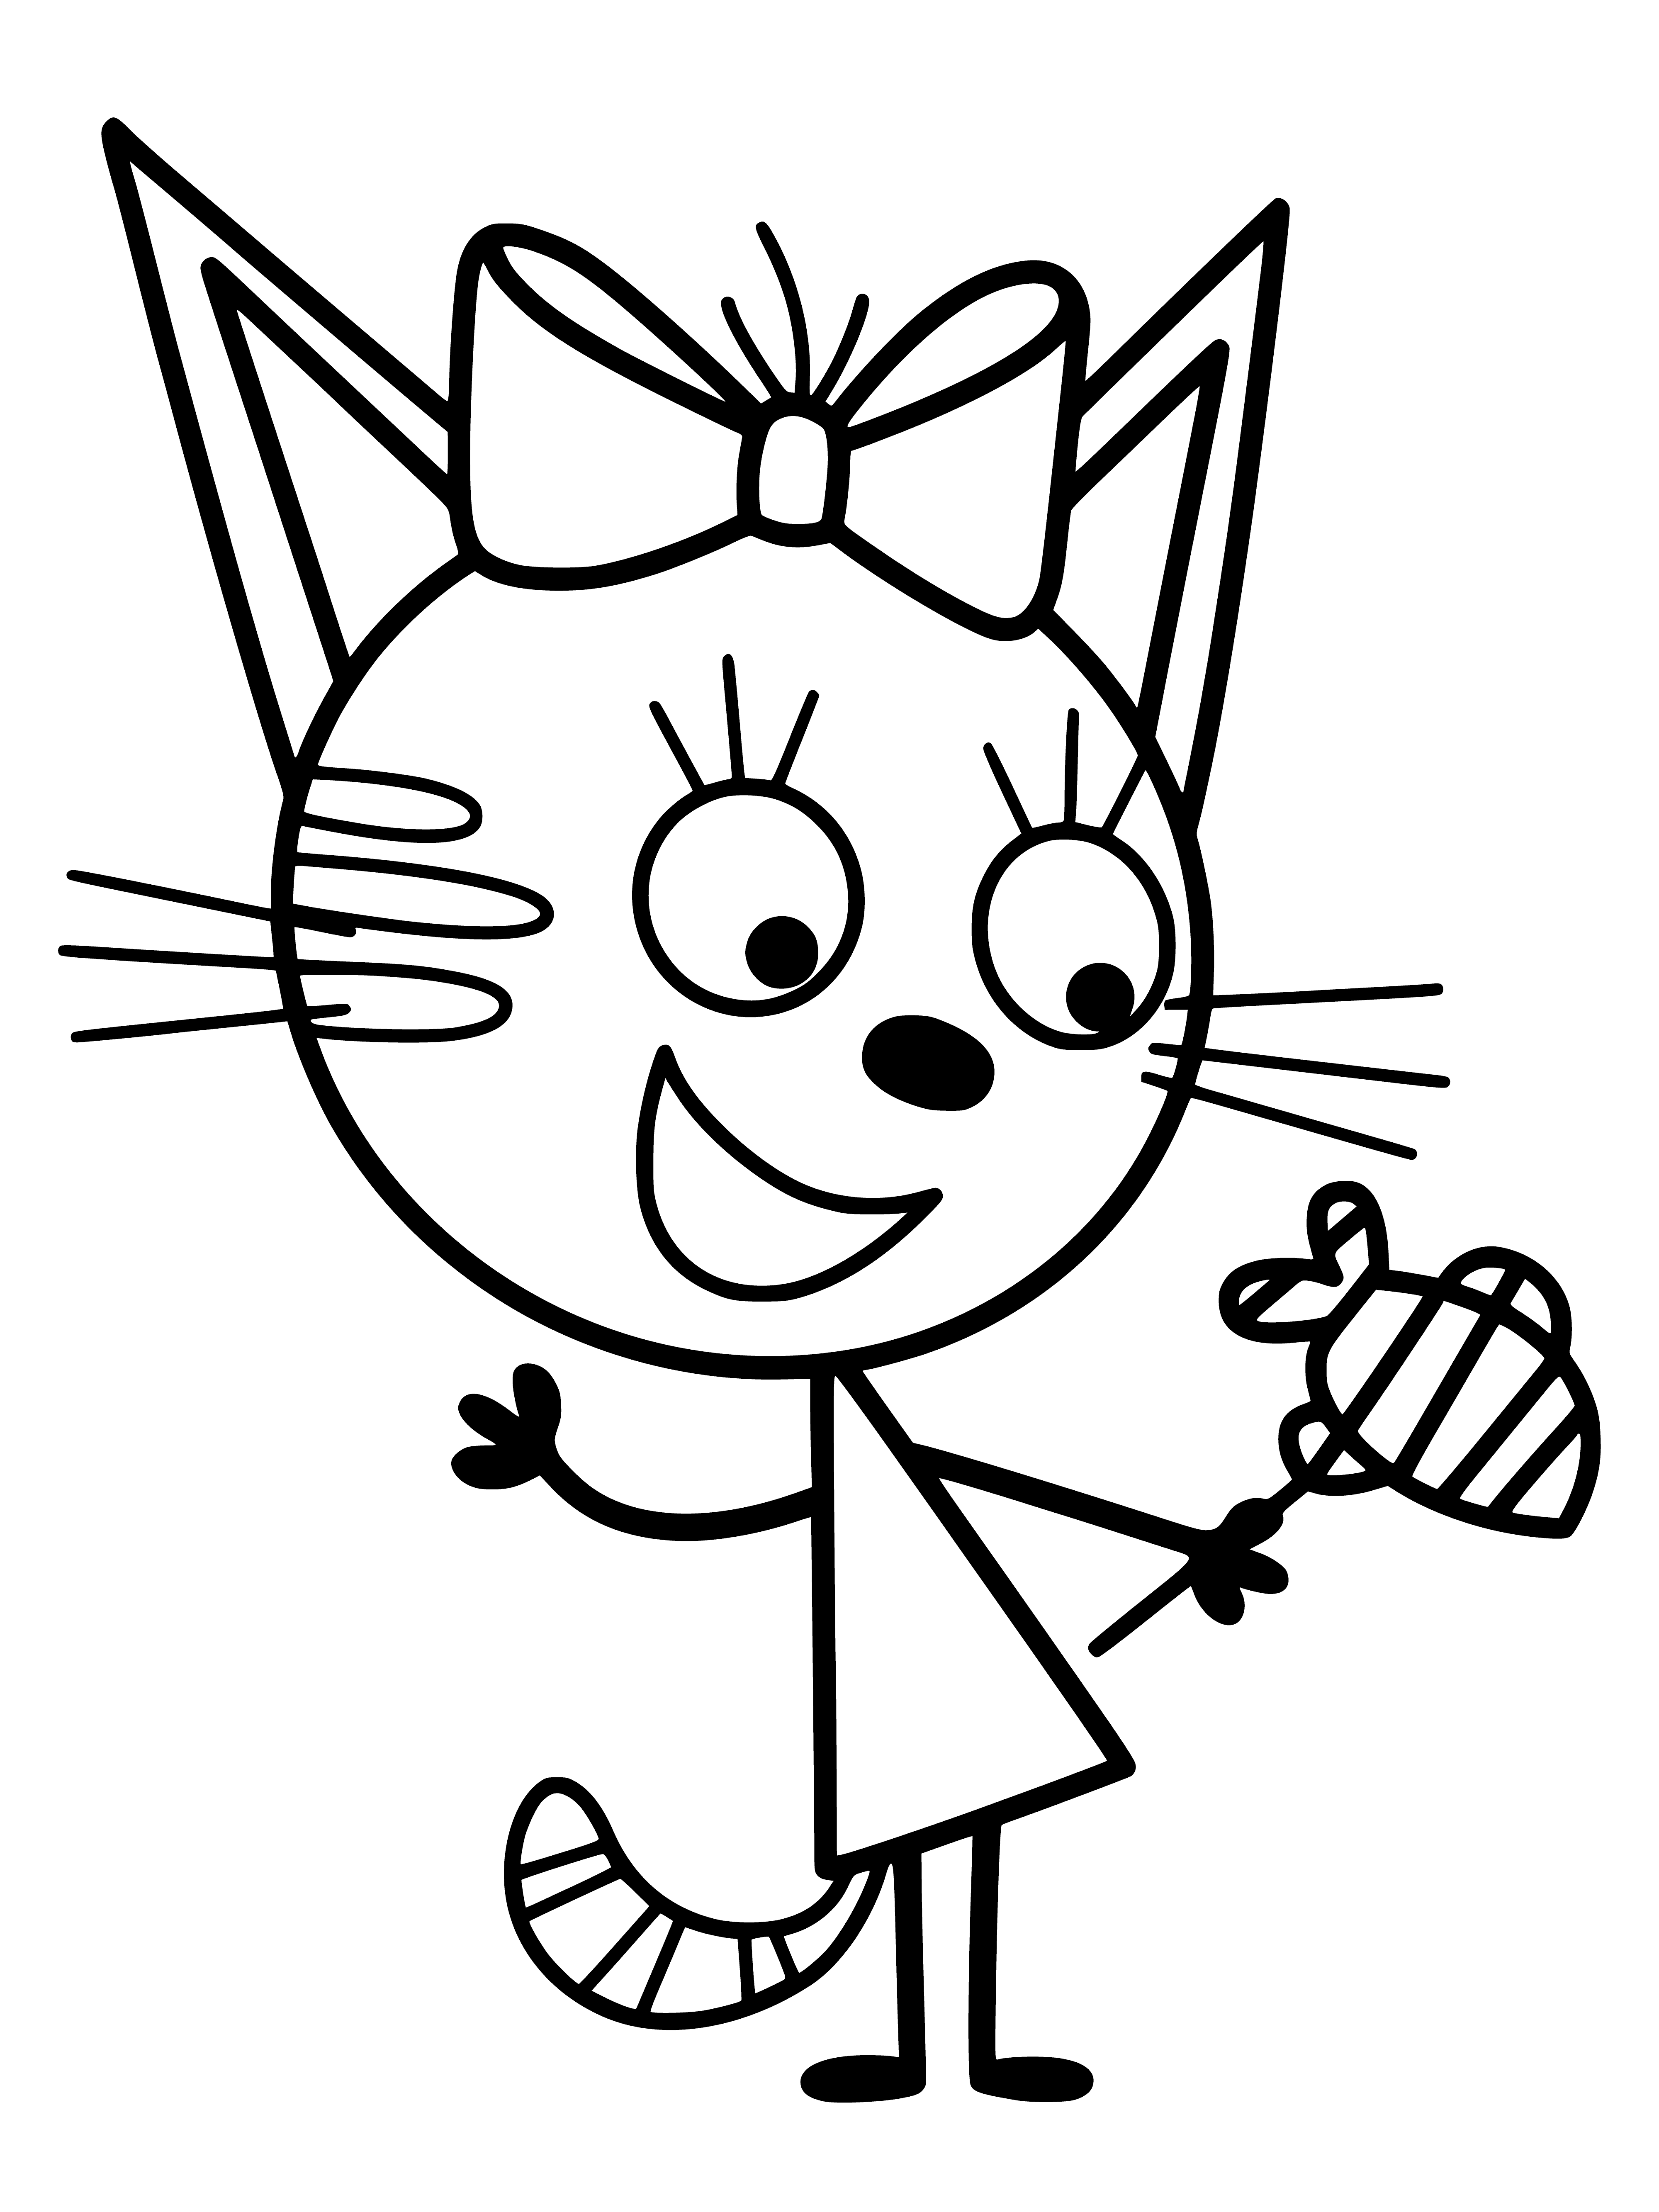 coloring page: Three cats in one page - lie, stand, and sit!